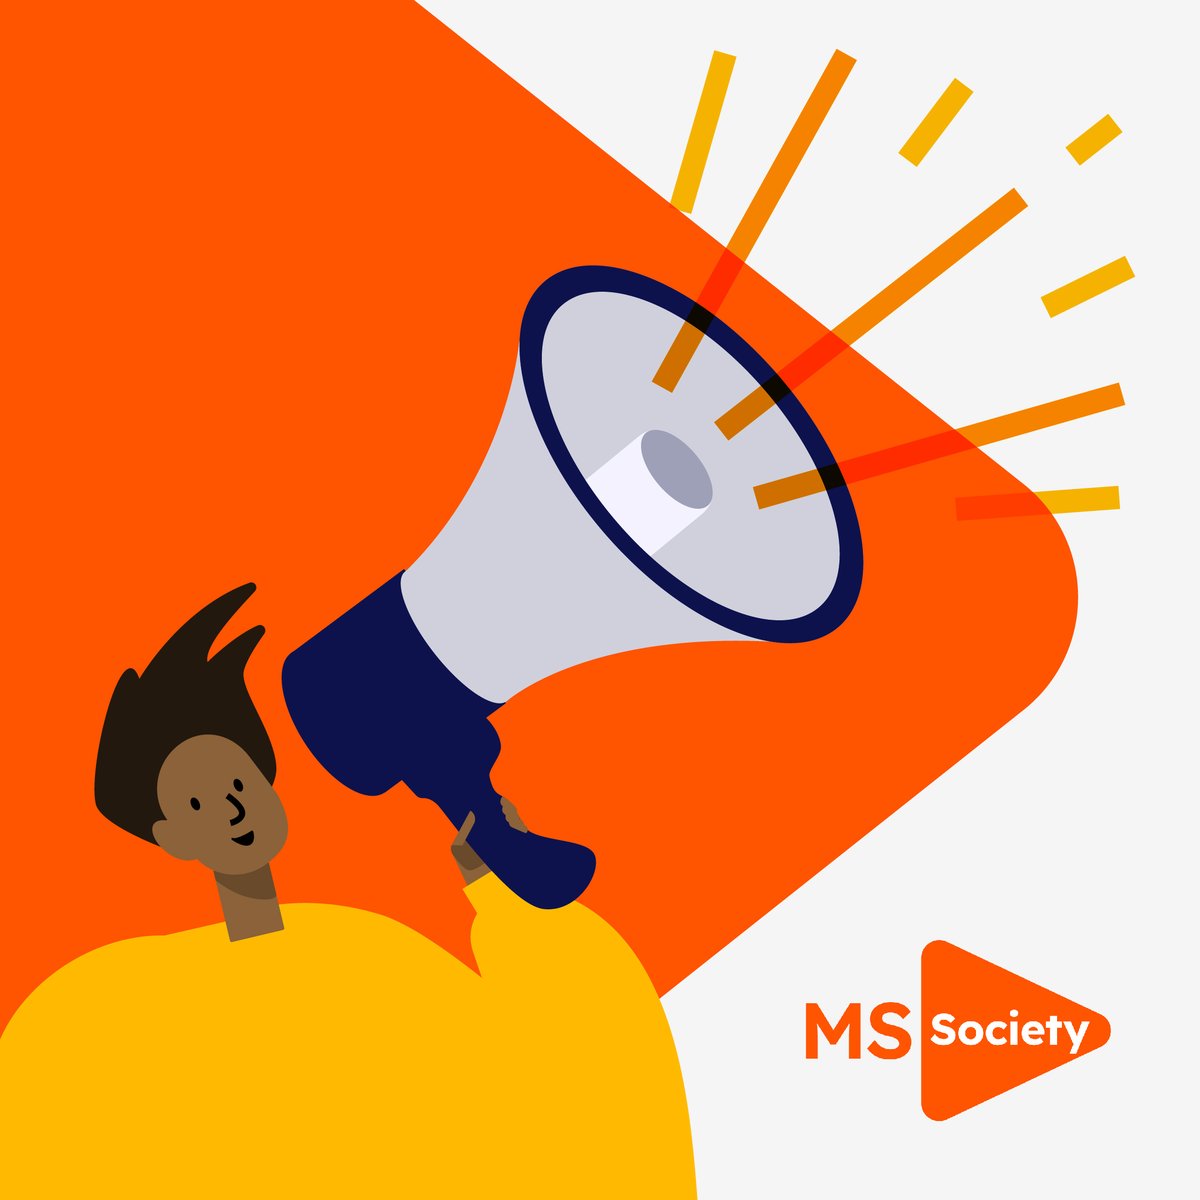 This year, we’ll have a general election, and a new opportunity to call for change for people with MS. 📢Let's make sure MS is on the agenda. Sign and share our open letter to the next Prime Minister, whoever it is! ➡️ mssoc.uk/4duE6il